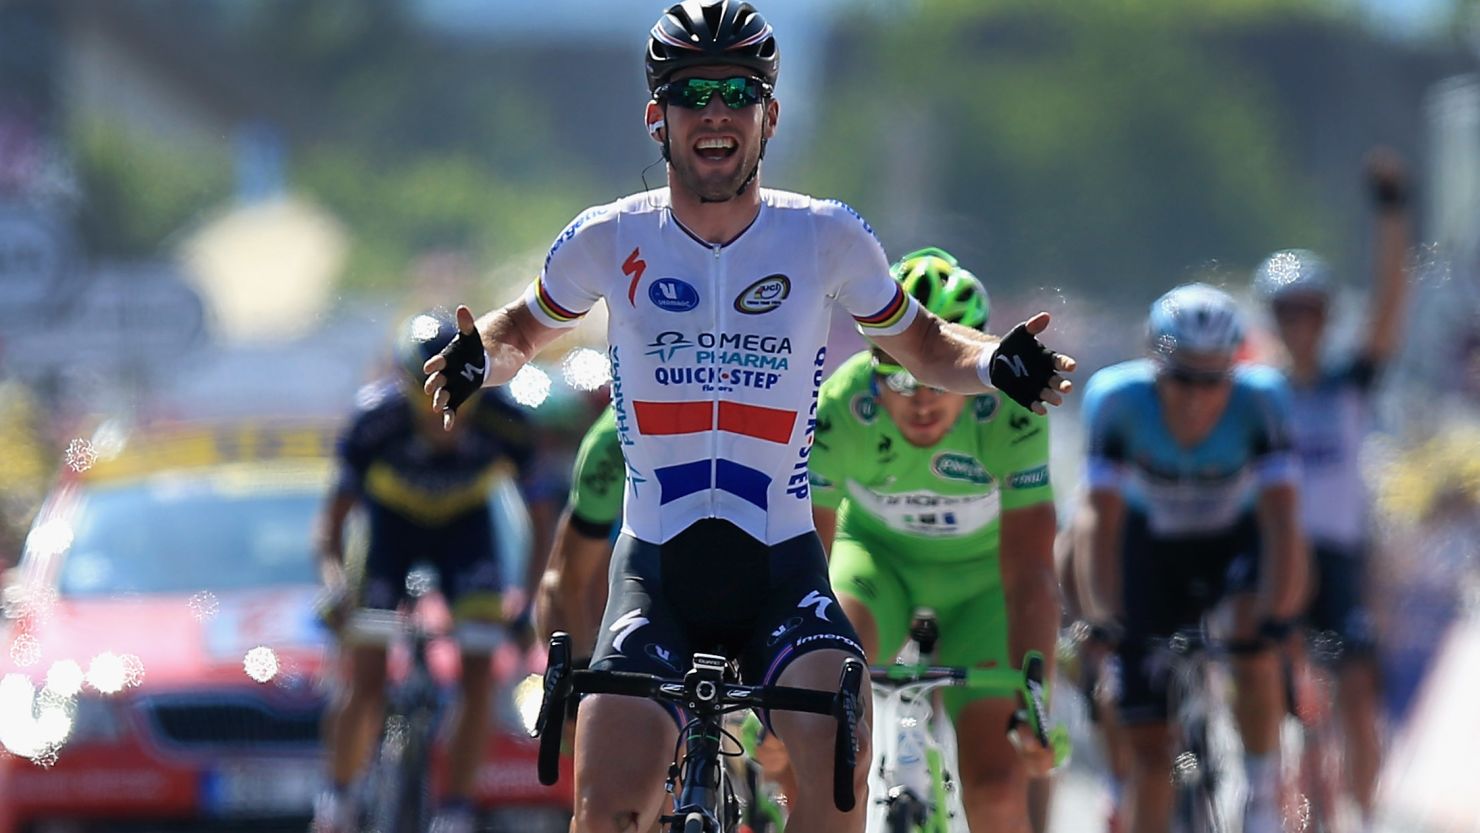 Mark Cavendish lost a sprint finish Thursday at the Tour de France but came out on top Friday in the 13th stage. 